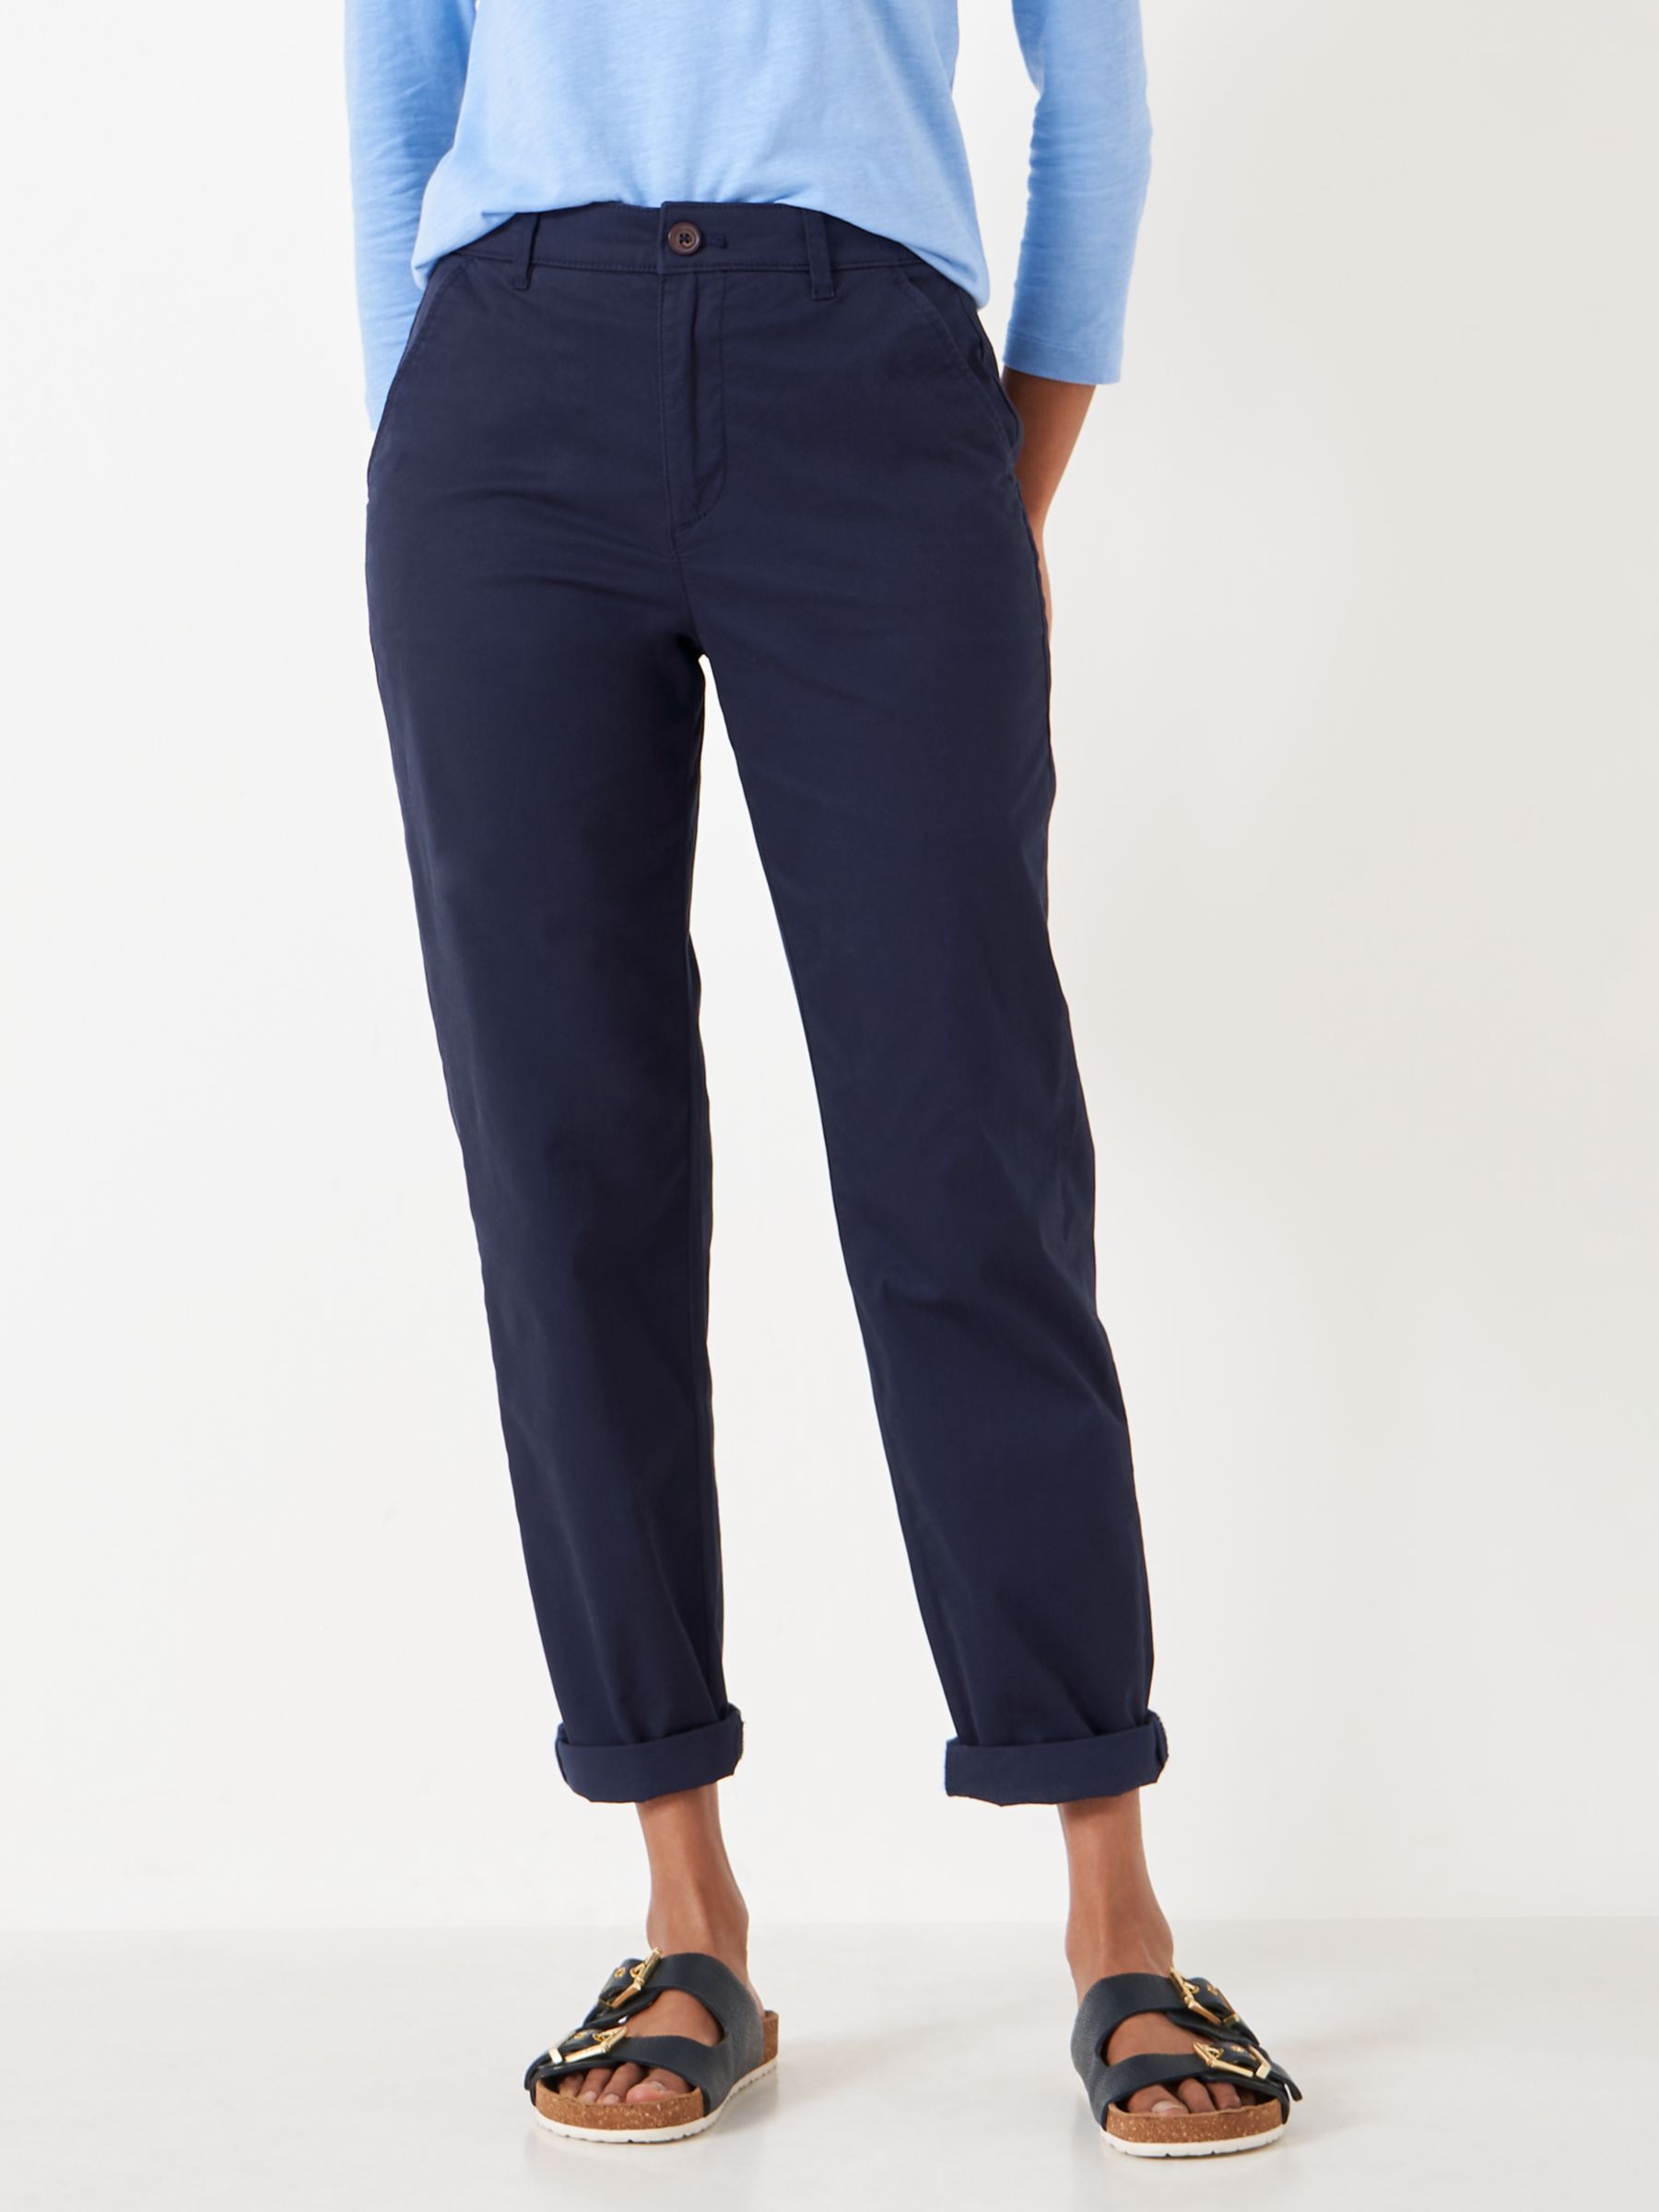 Crew Clothing Chino Trousers, Navy Blue at John Lewis & Partners